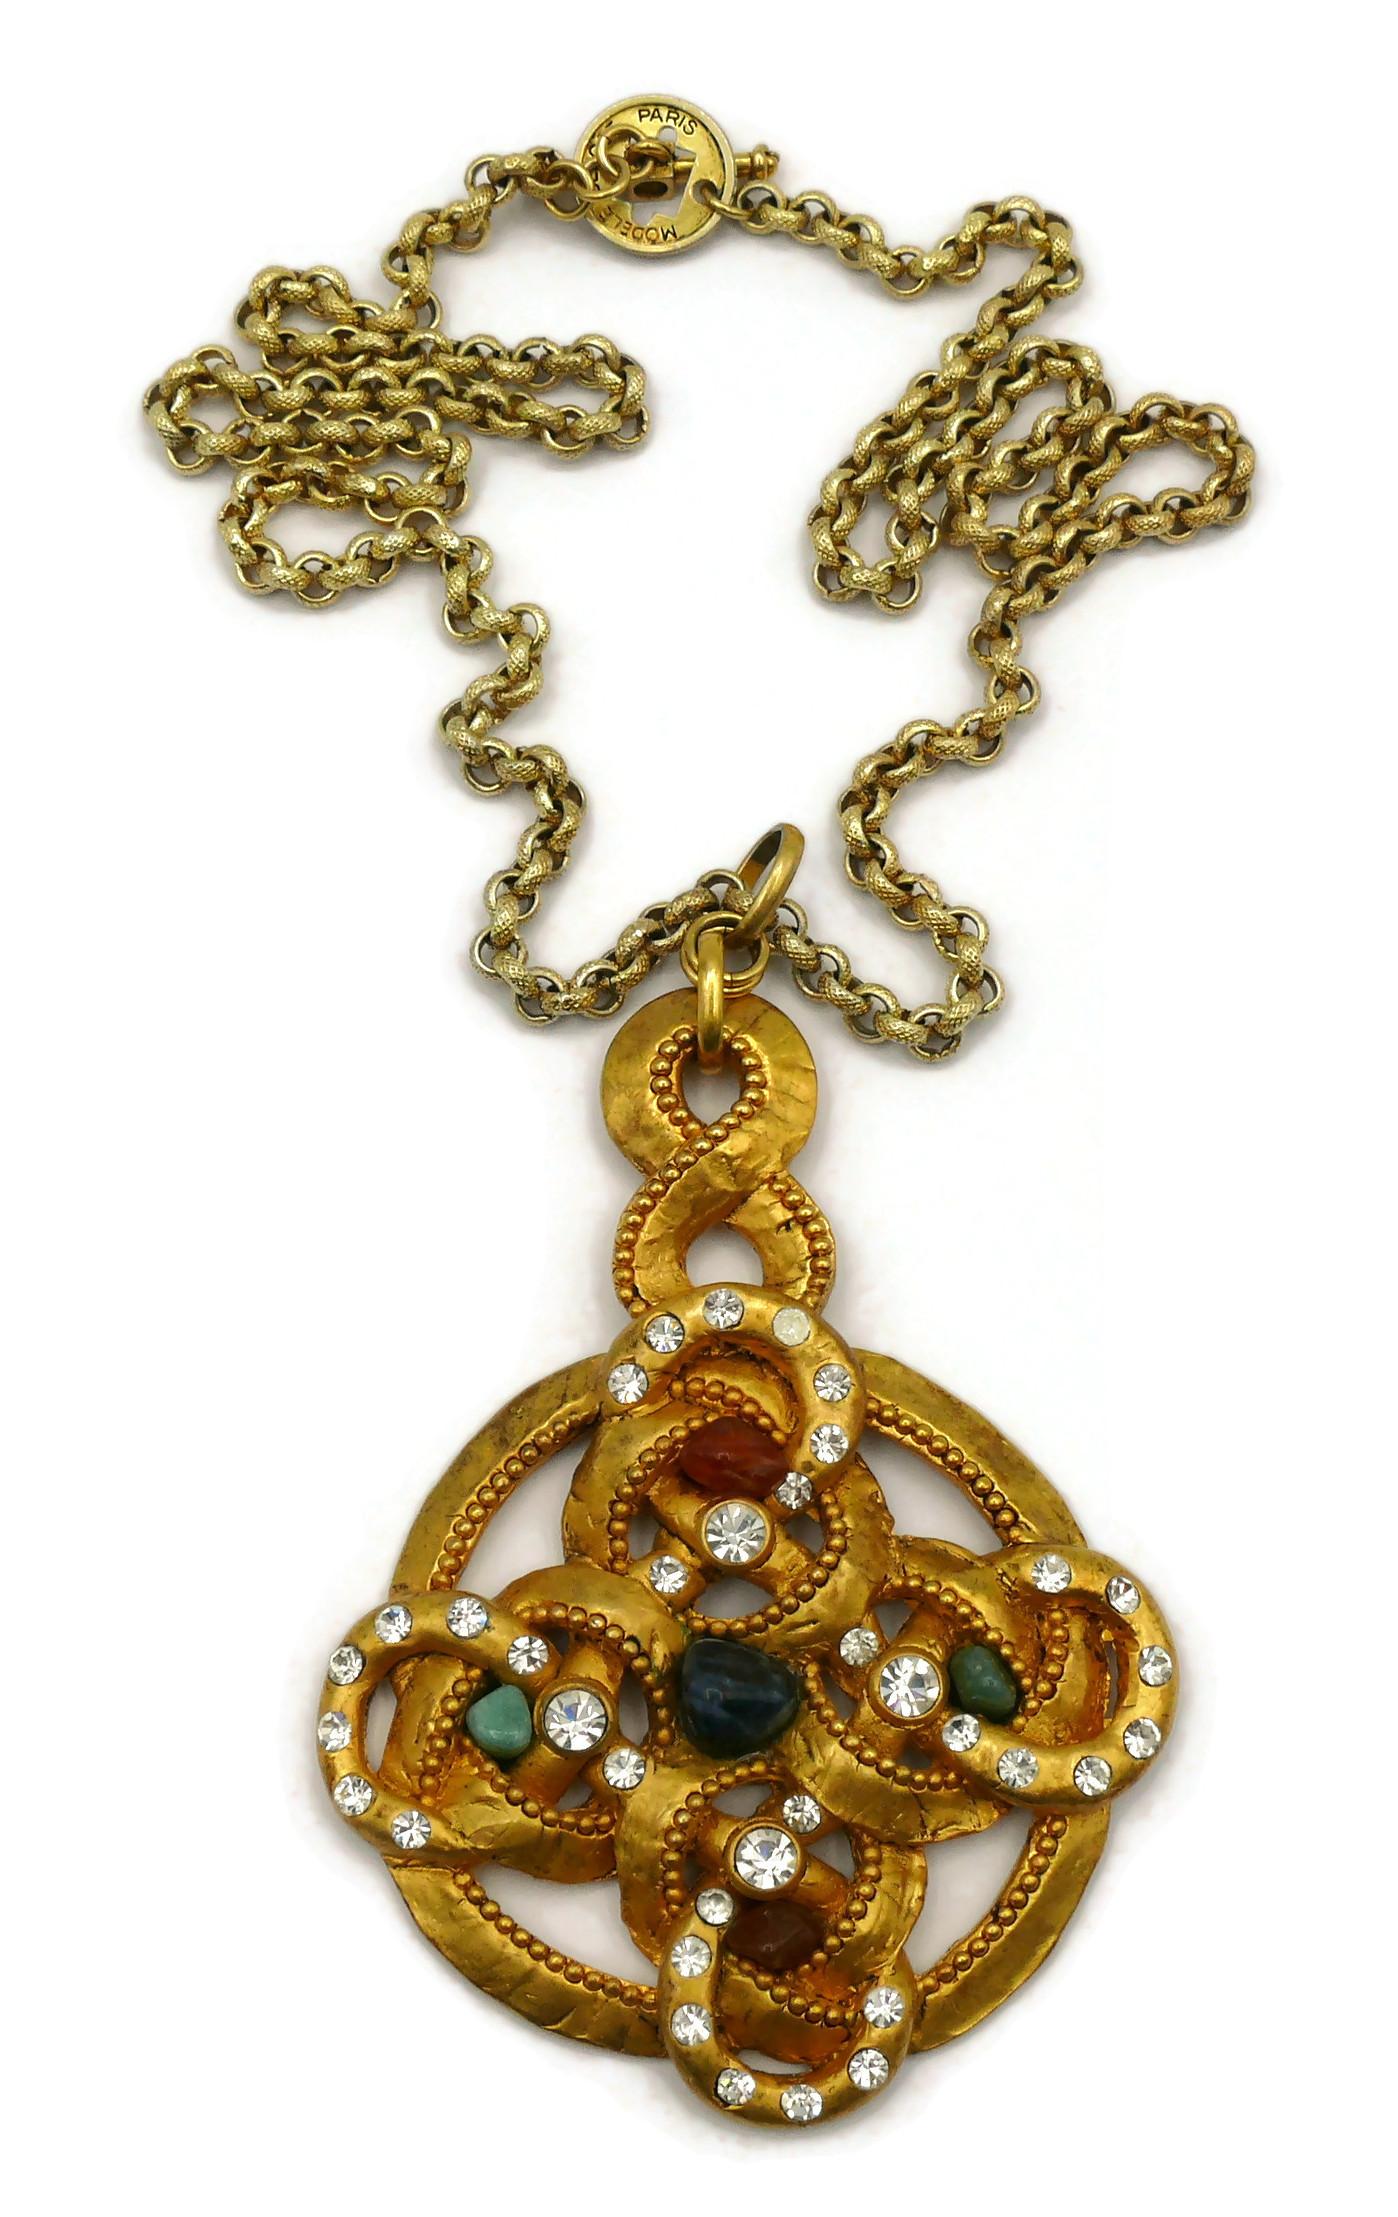 CLAIRE DEVE Vintage Massive Jewelled Pendant Necklace In Good Condition For Sale In Nice, FR